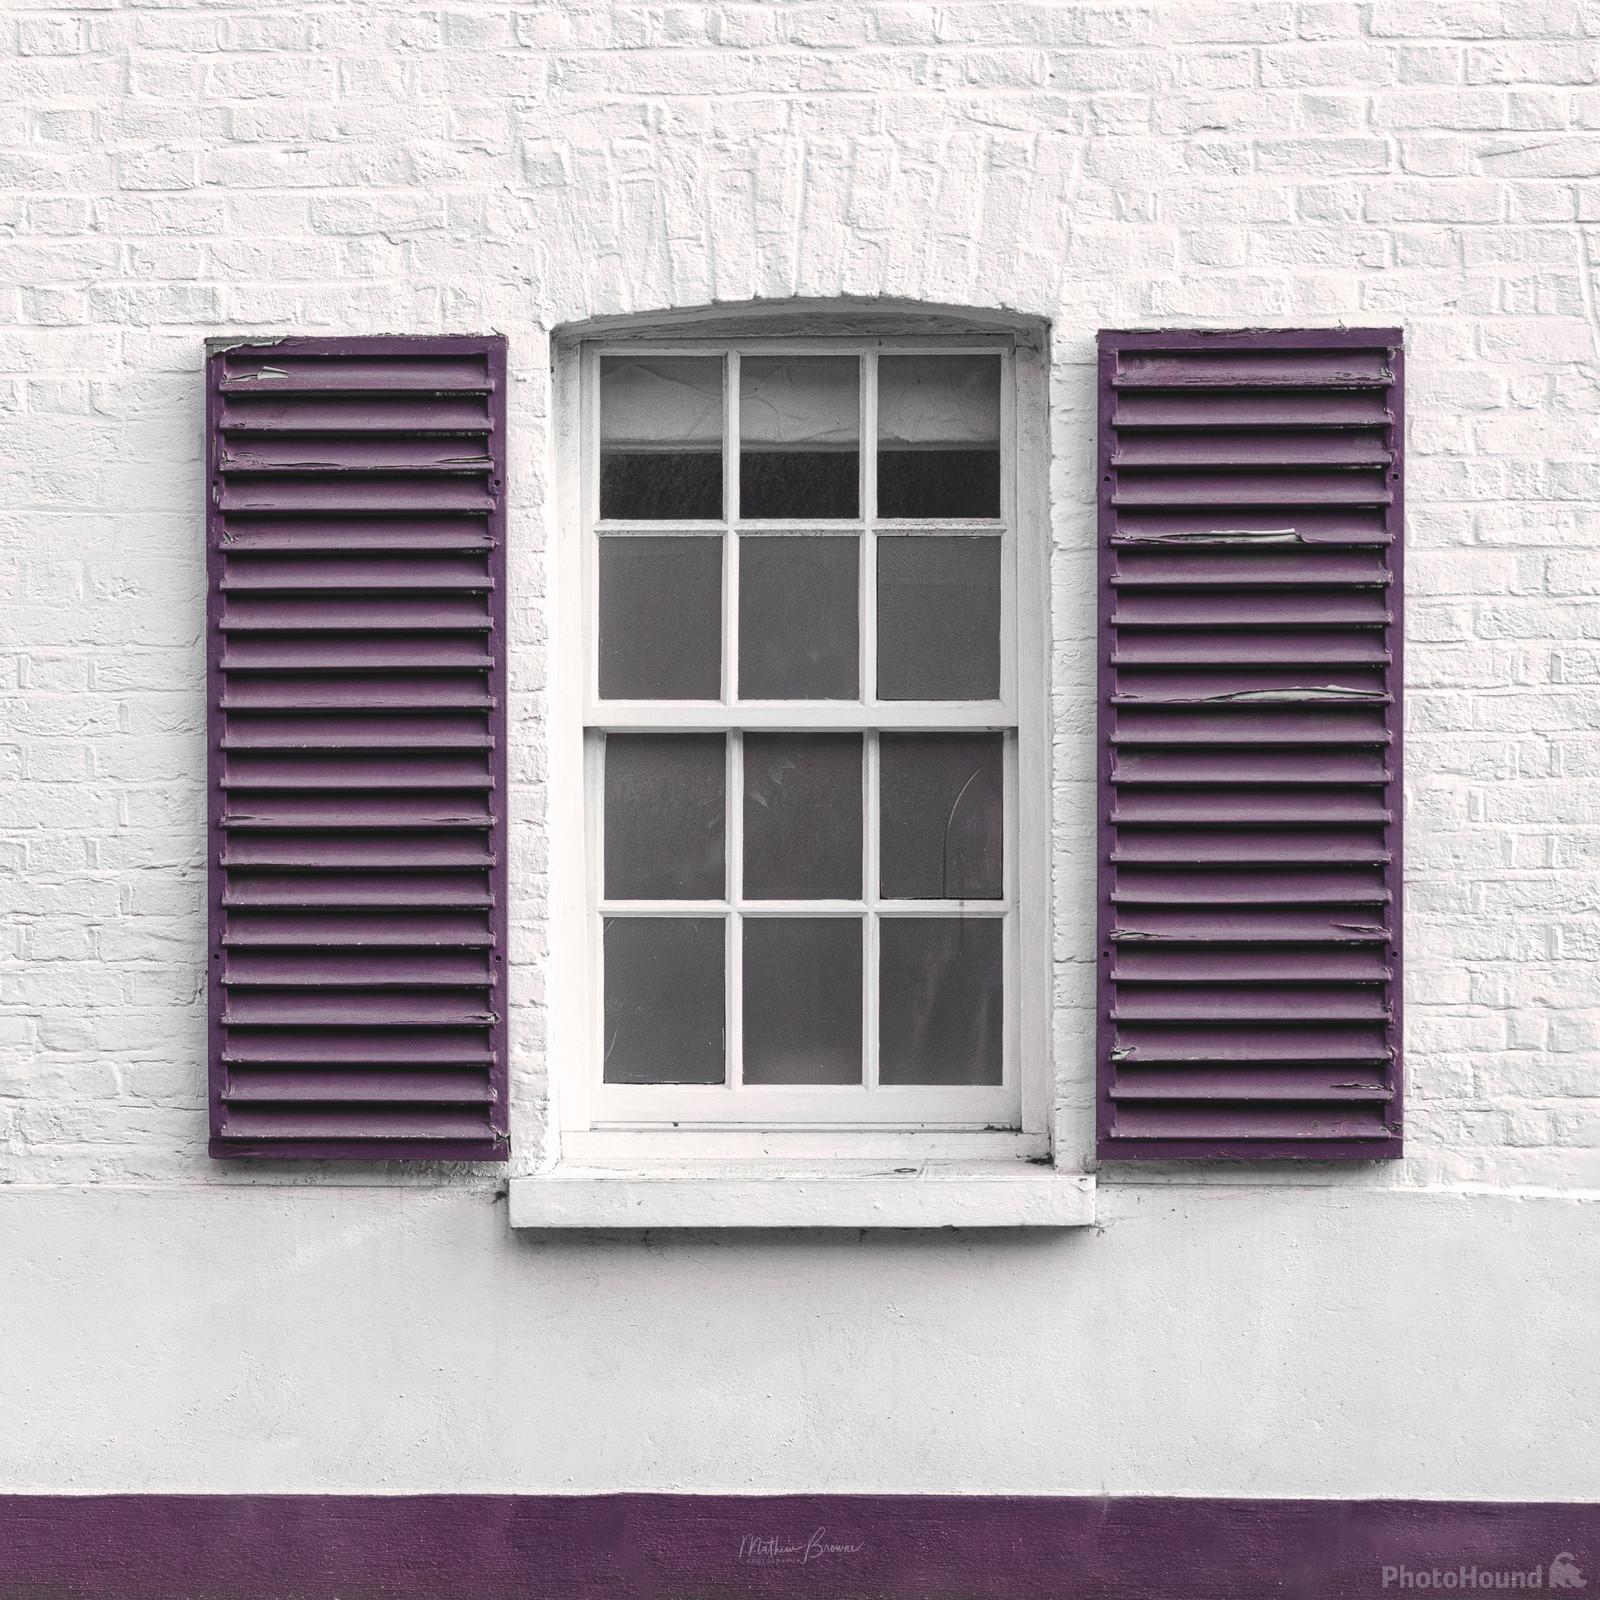 Image of Sheen Lane Shuttered Houses by Mathew Browne